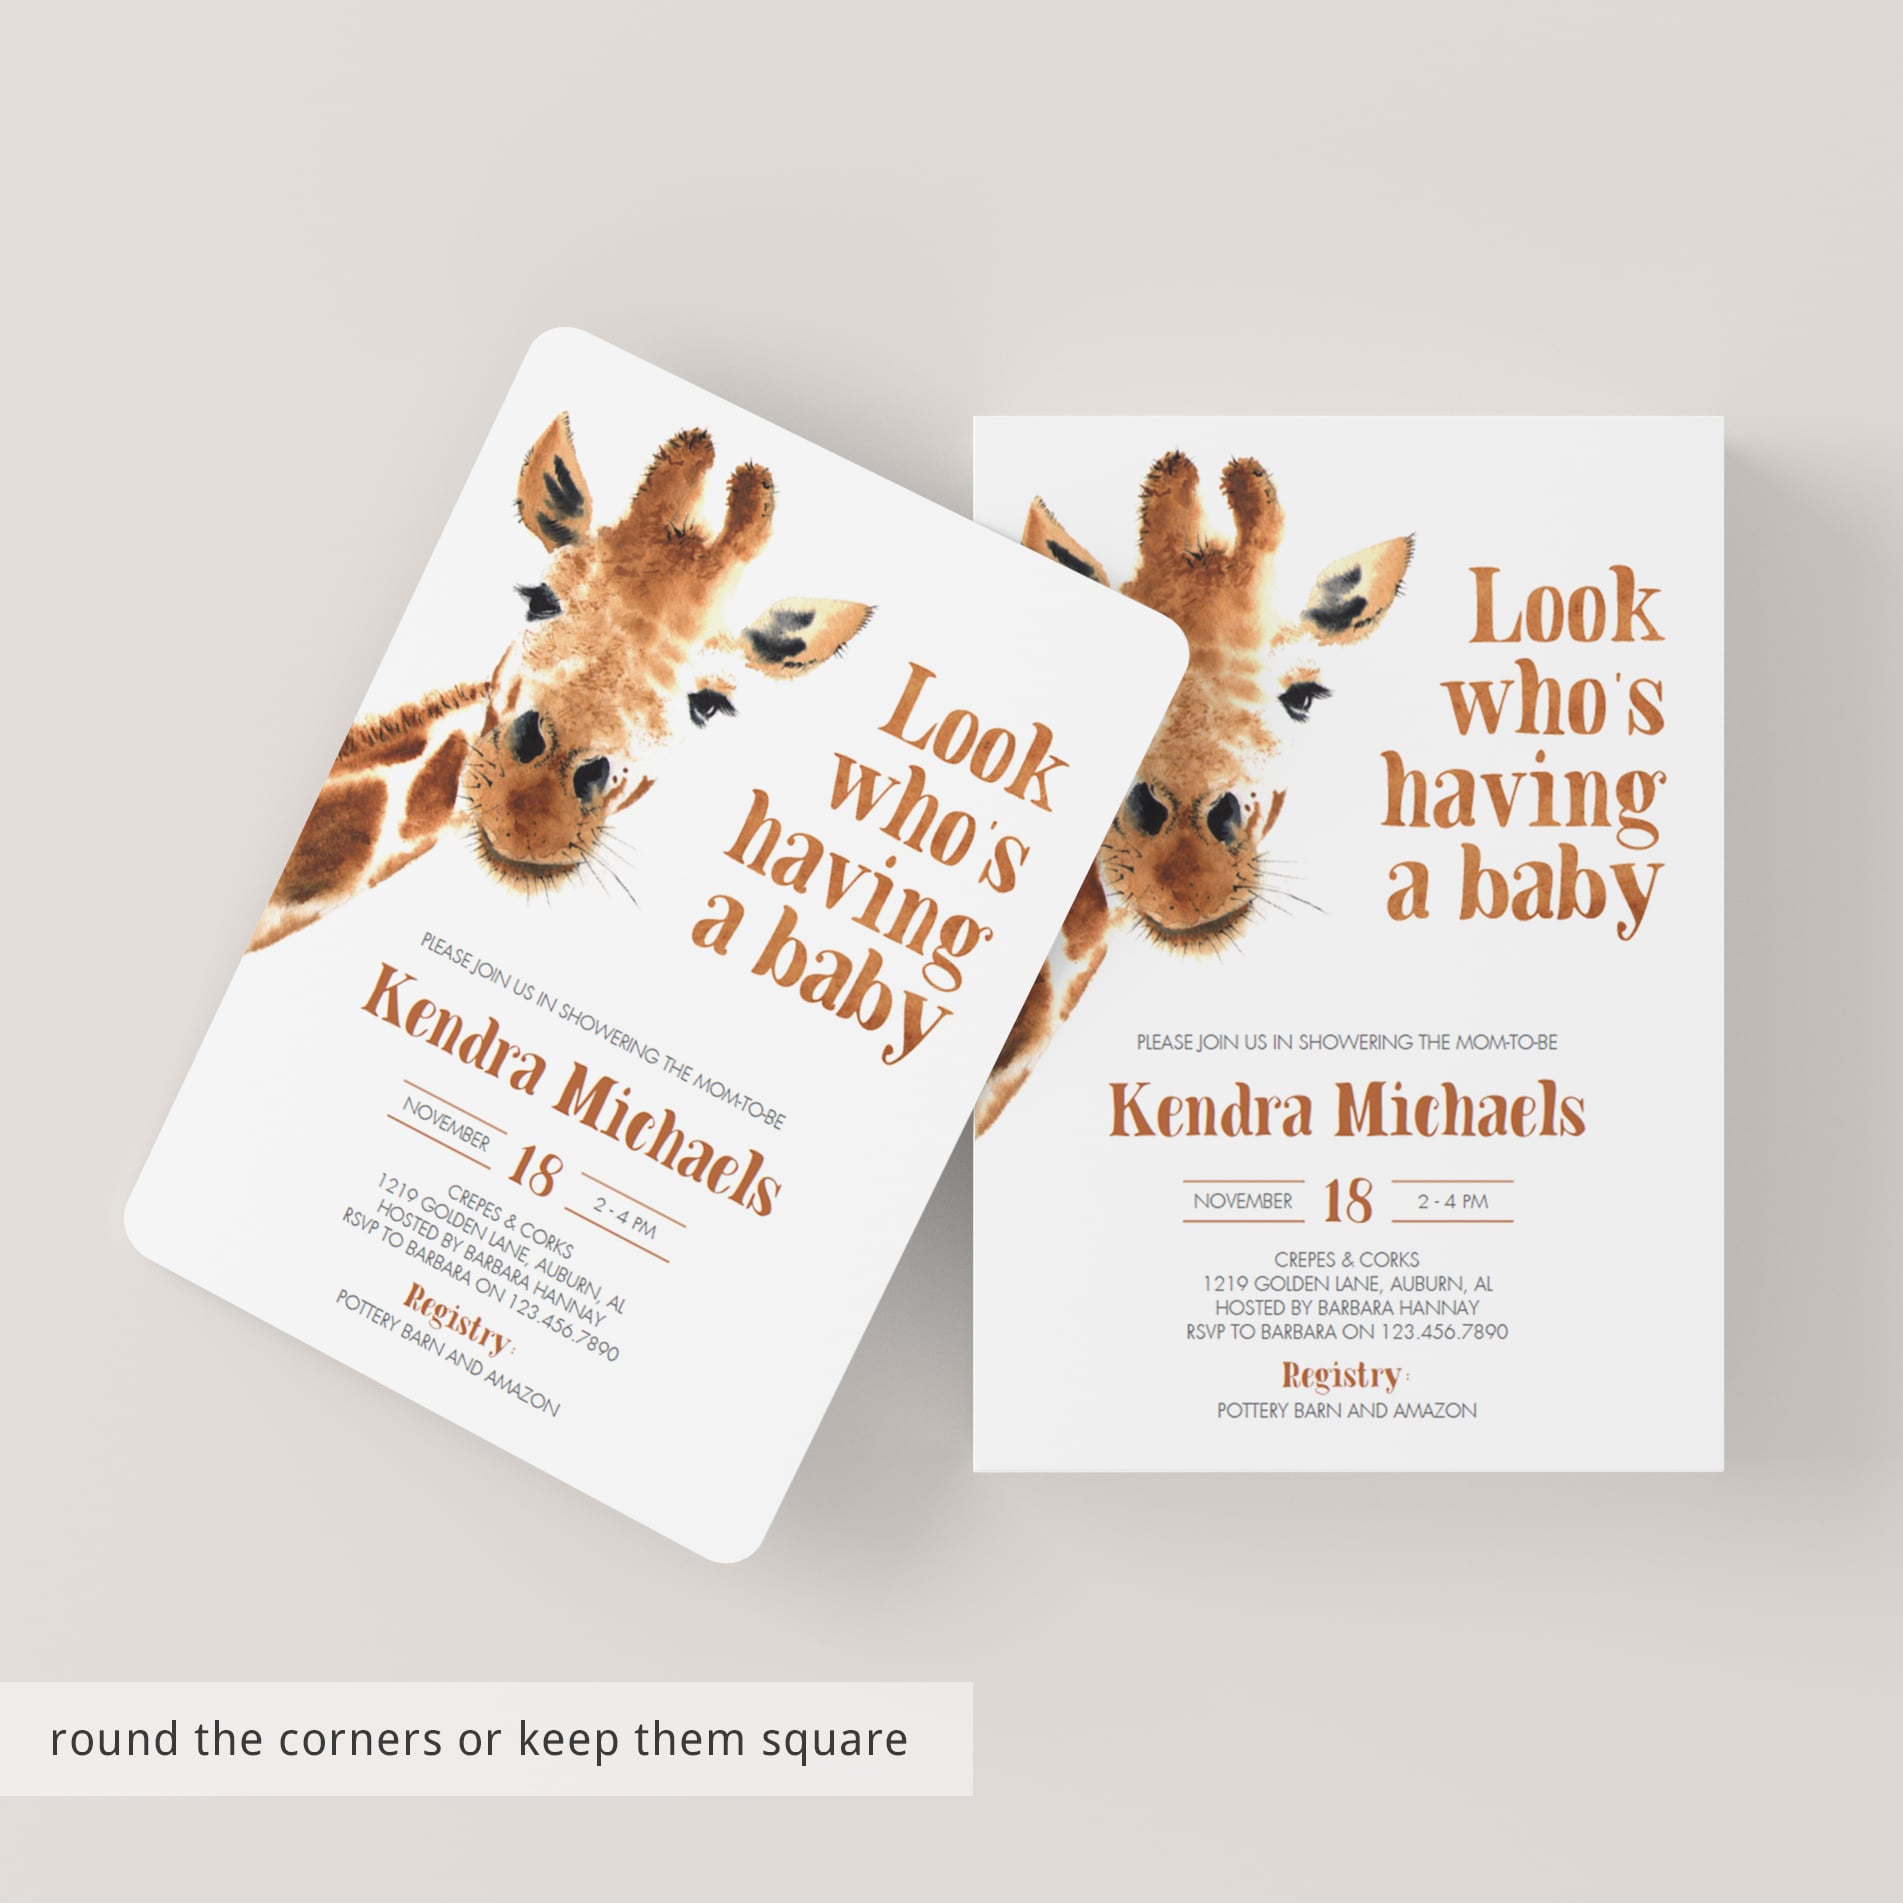 Printable baby shower invitations funny by LittleSizzle